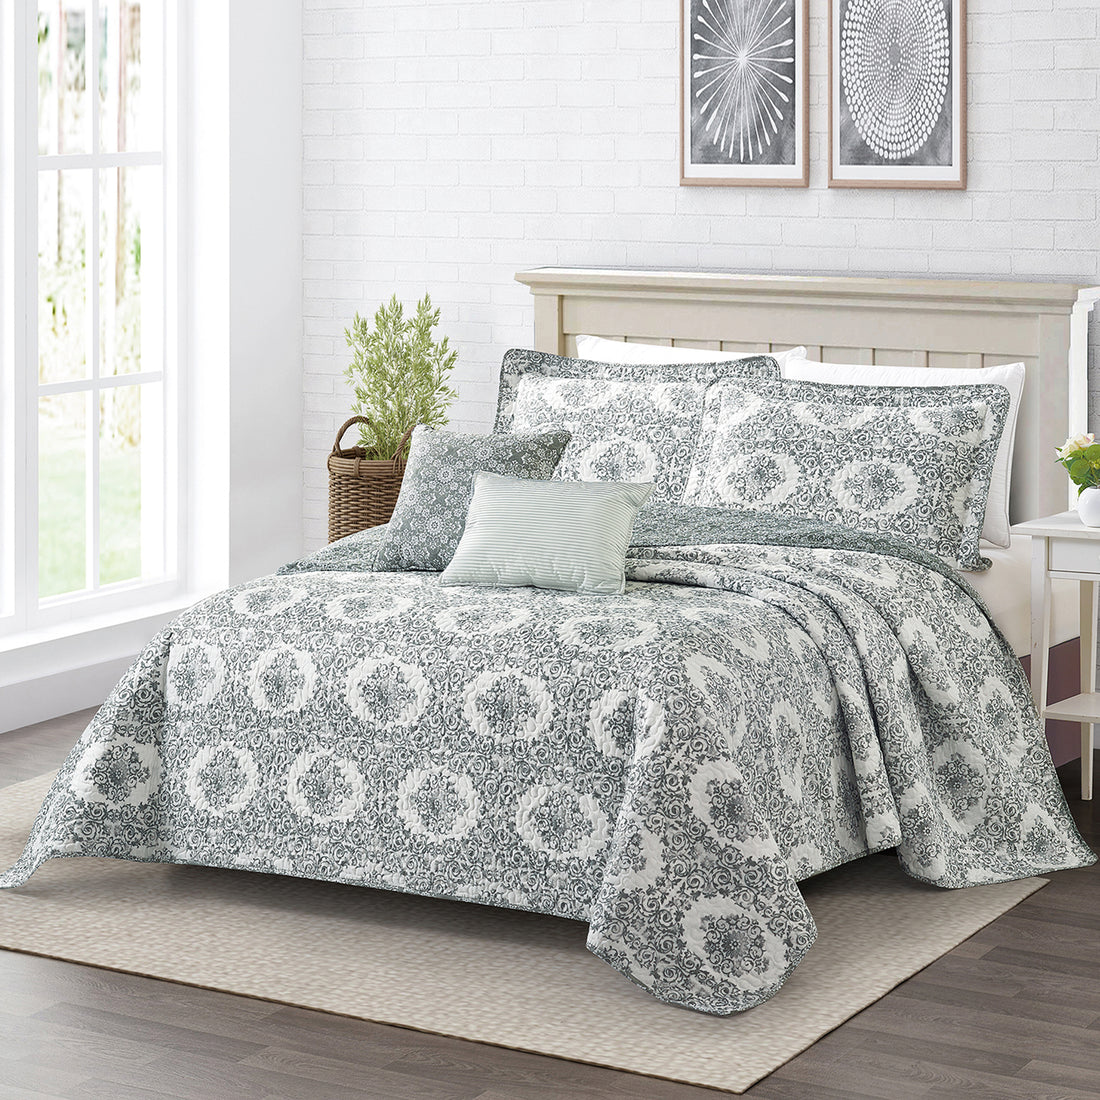 5 Piece Legacy Printed Microfiber Quilts Set